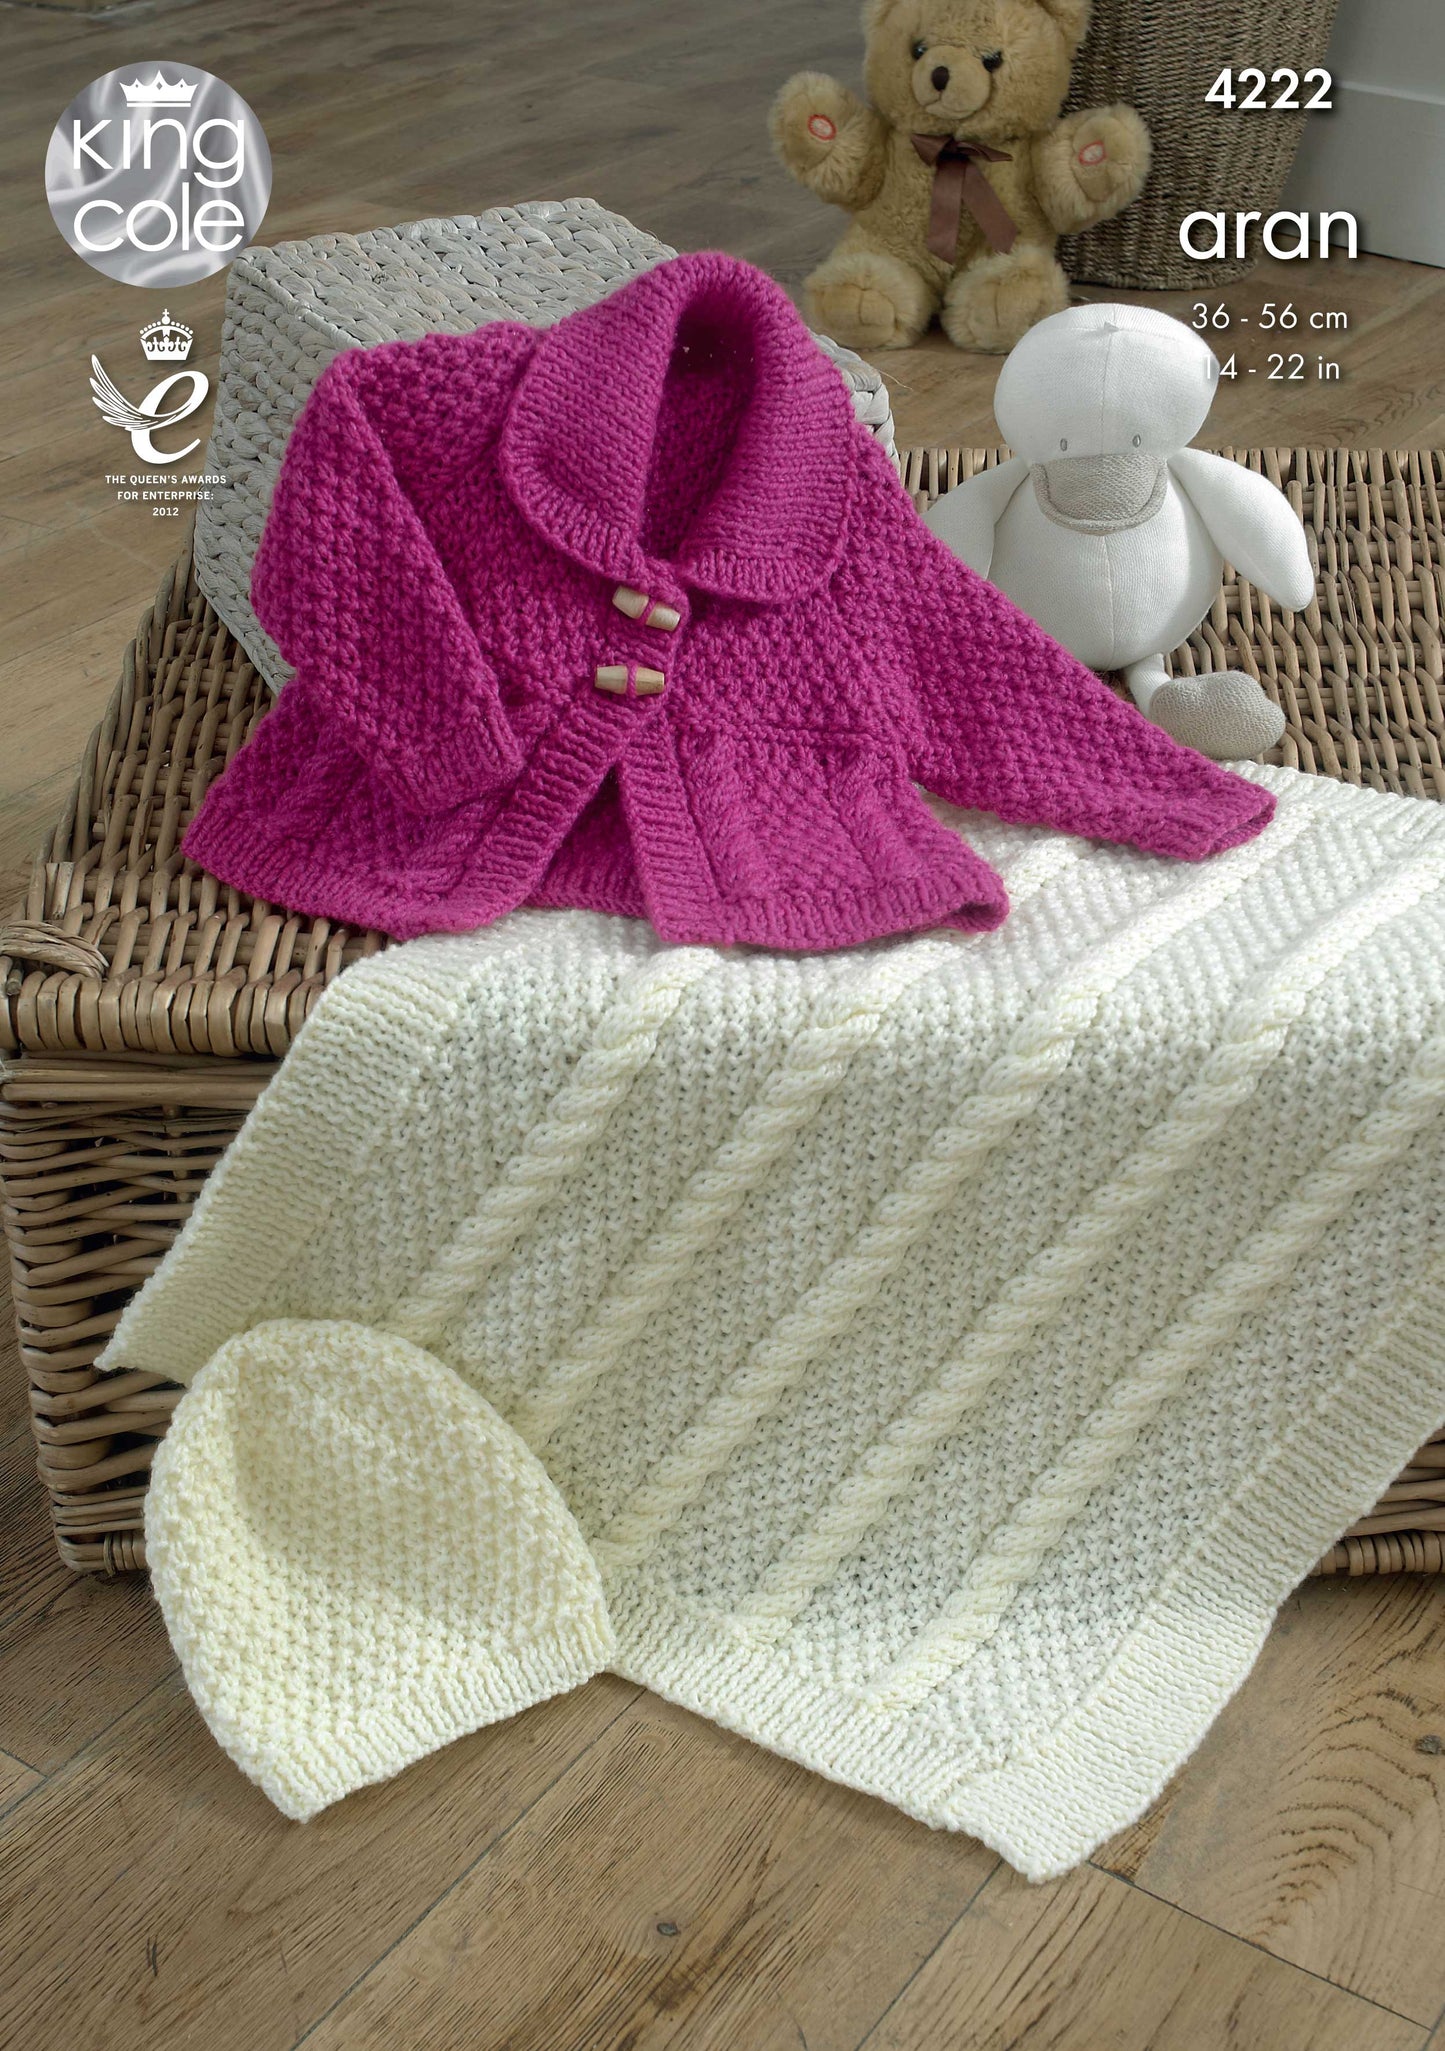 Knitting Pattern 4222 - Jacket, Blanket and Hat Knitted with Comfort Aran